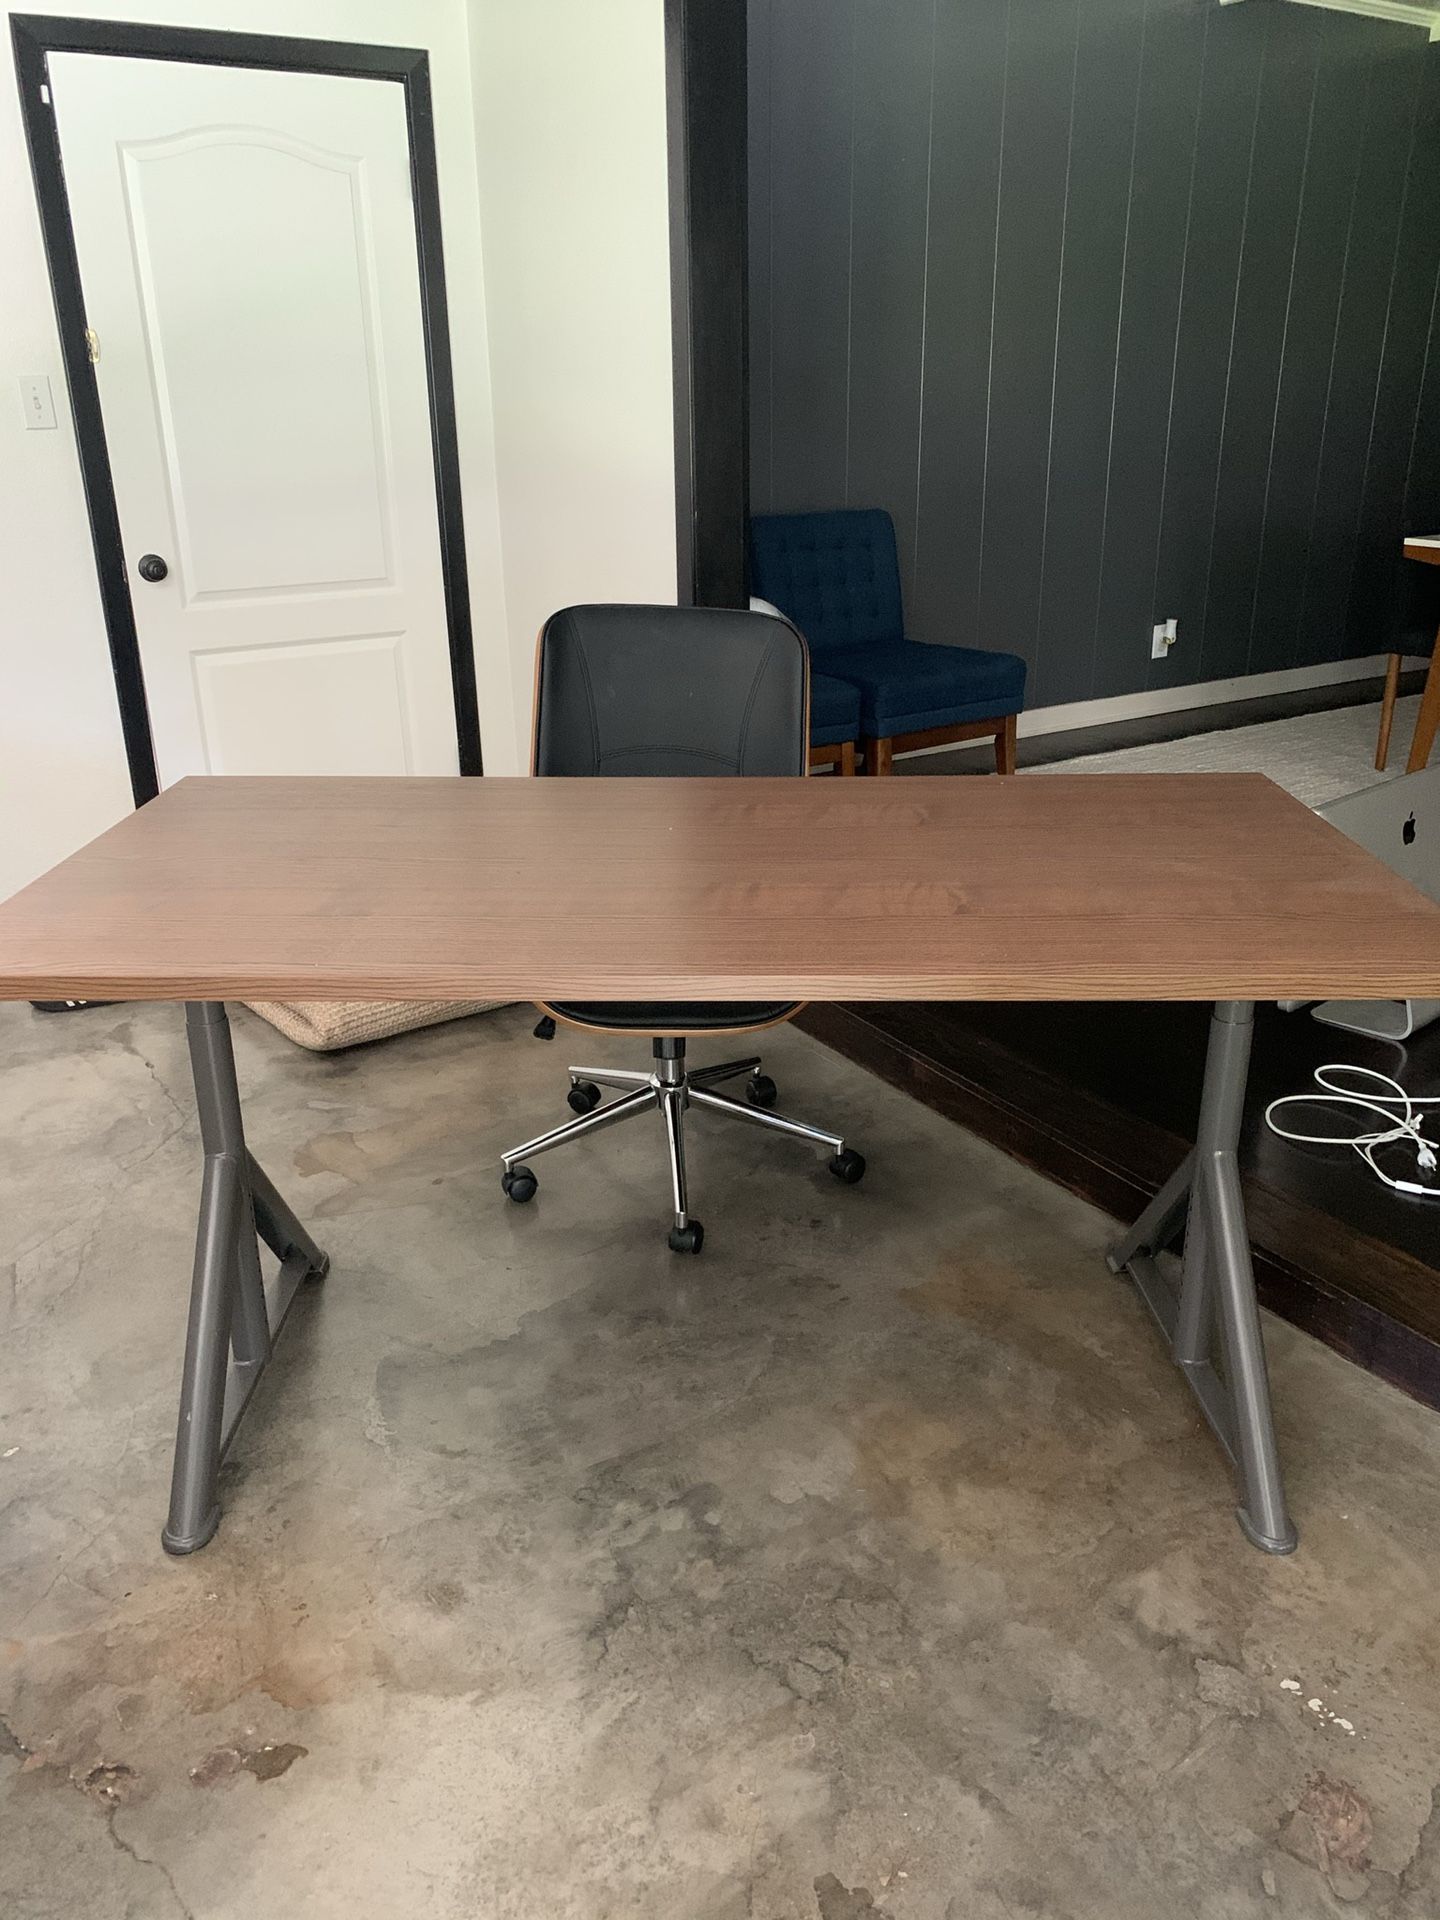 IKEA desk and chair - 100